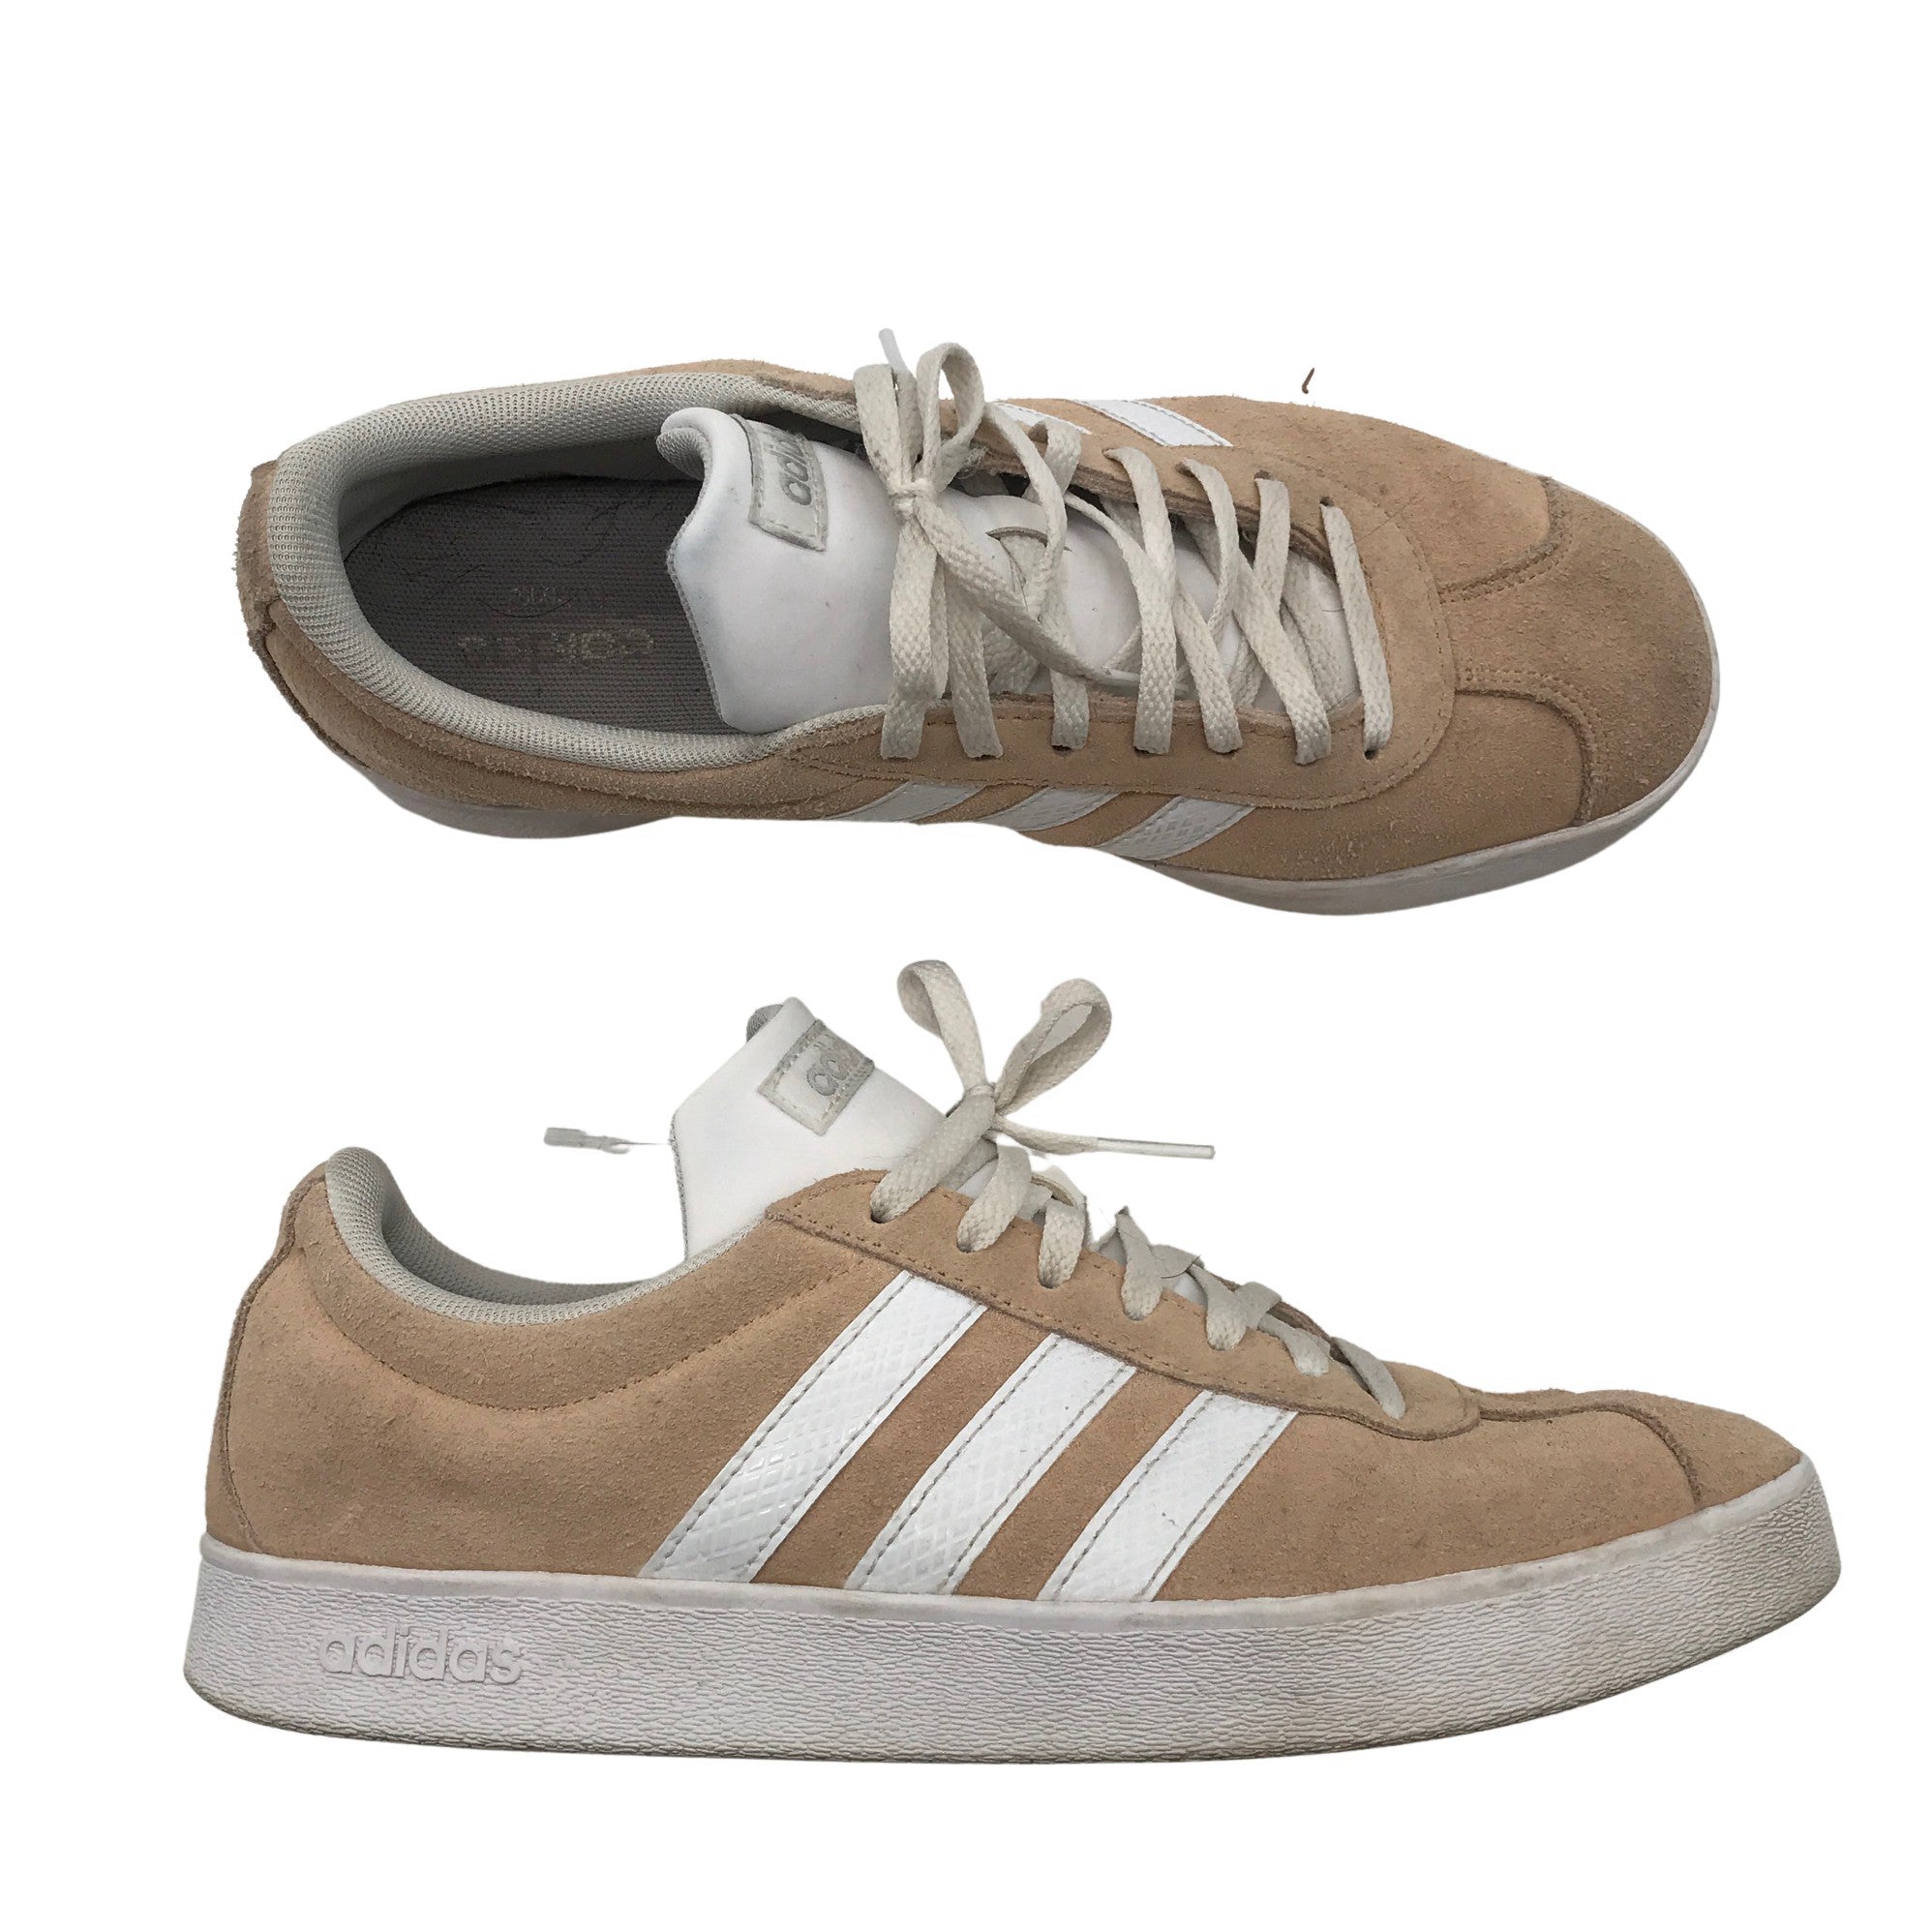 Women's Adidas Casual sneakers, 41 (Light red) | Emmy